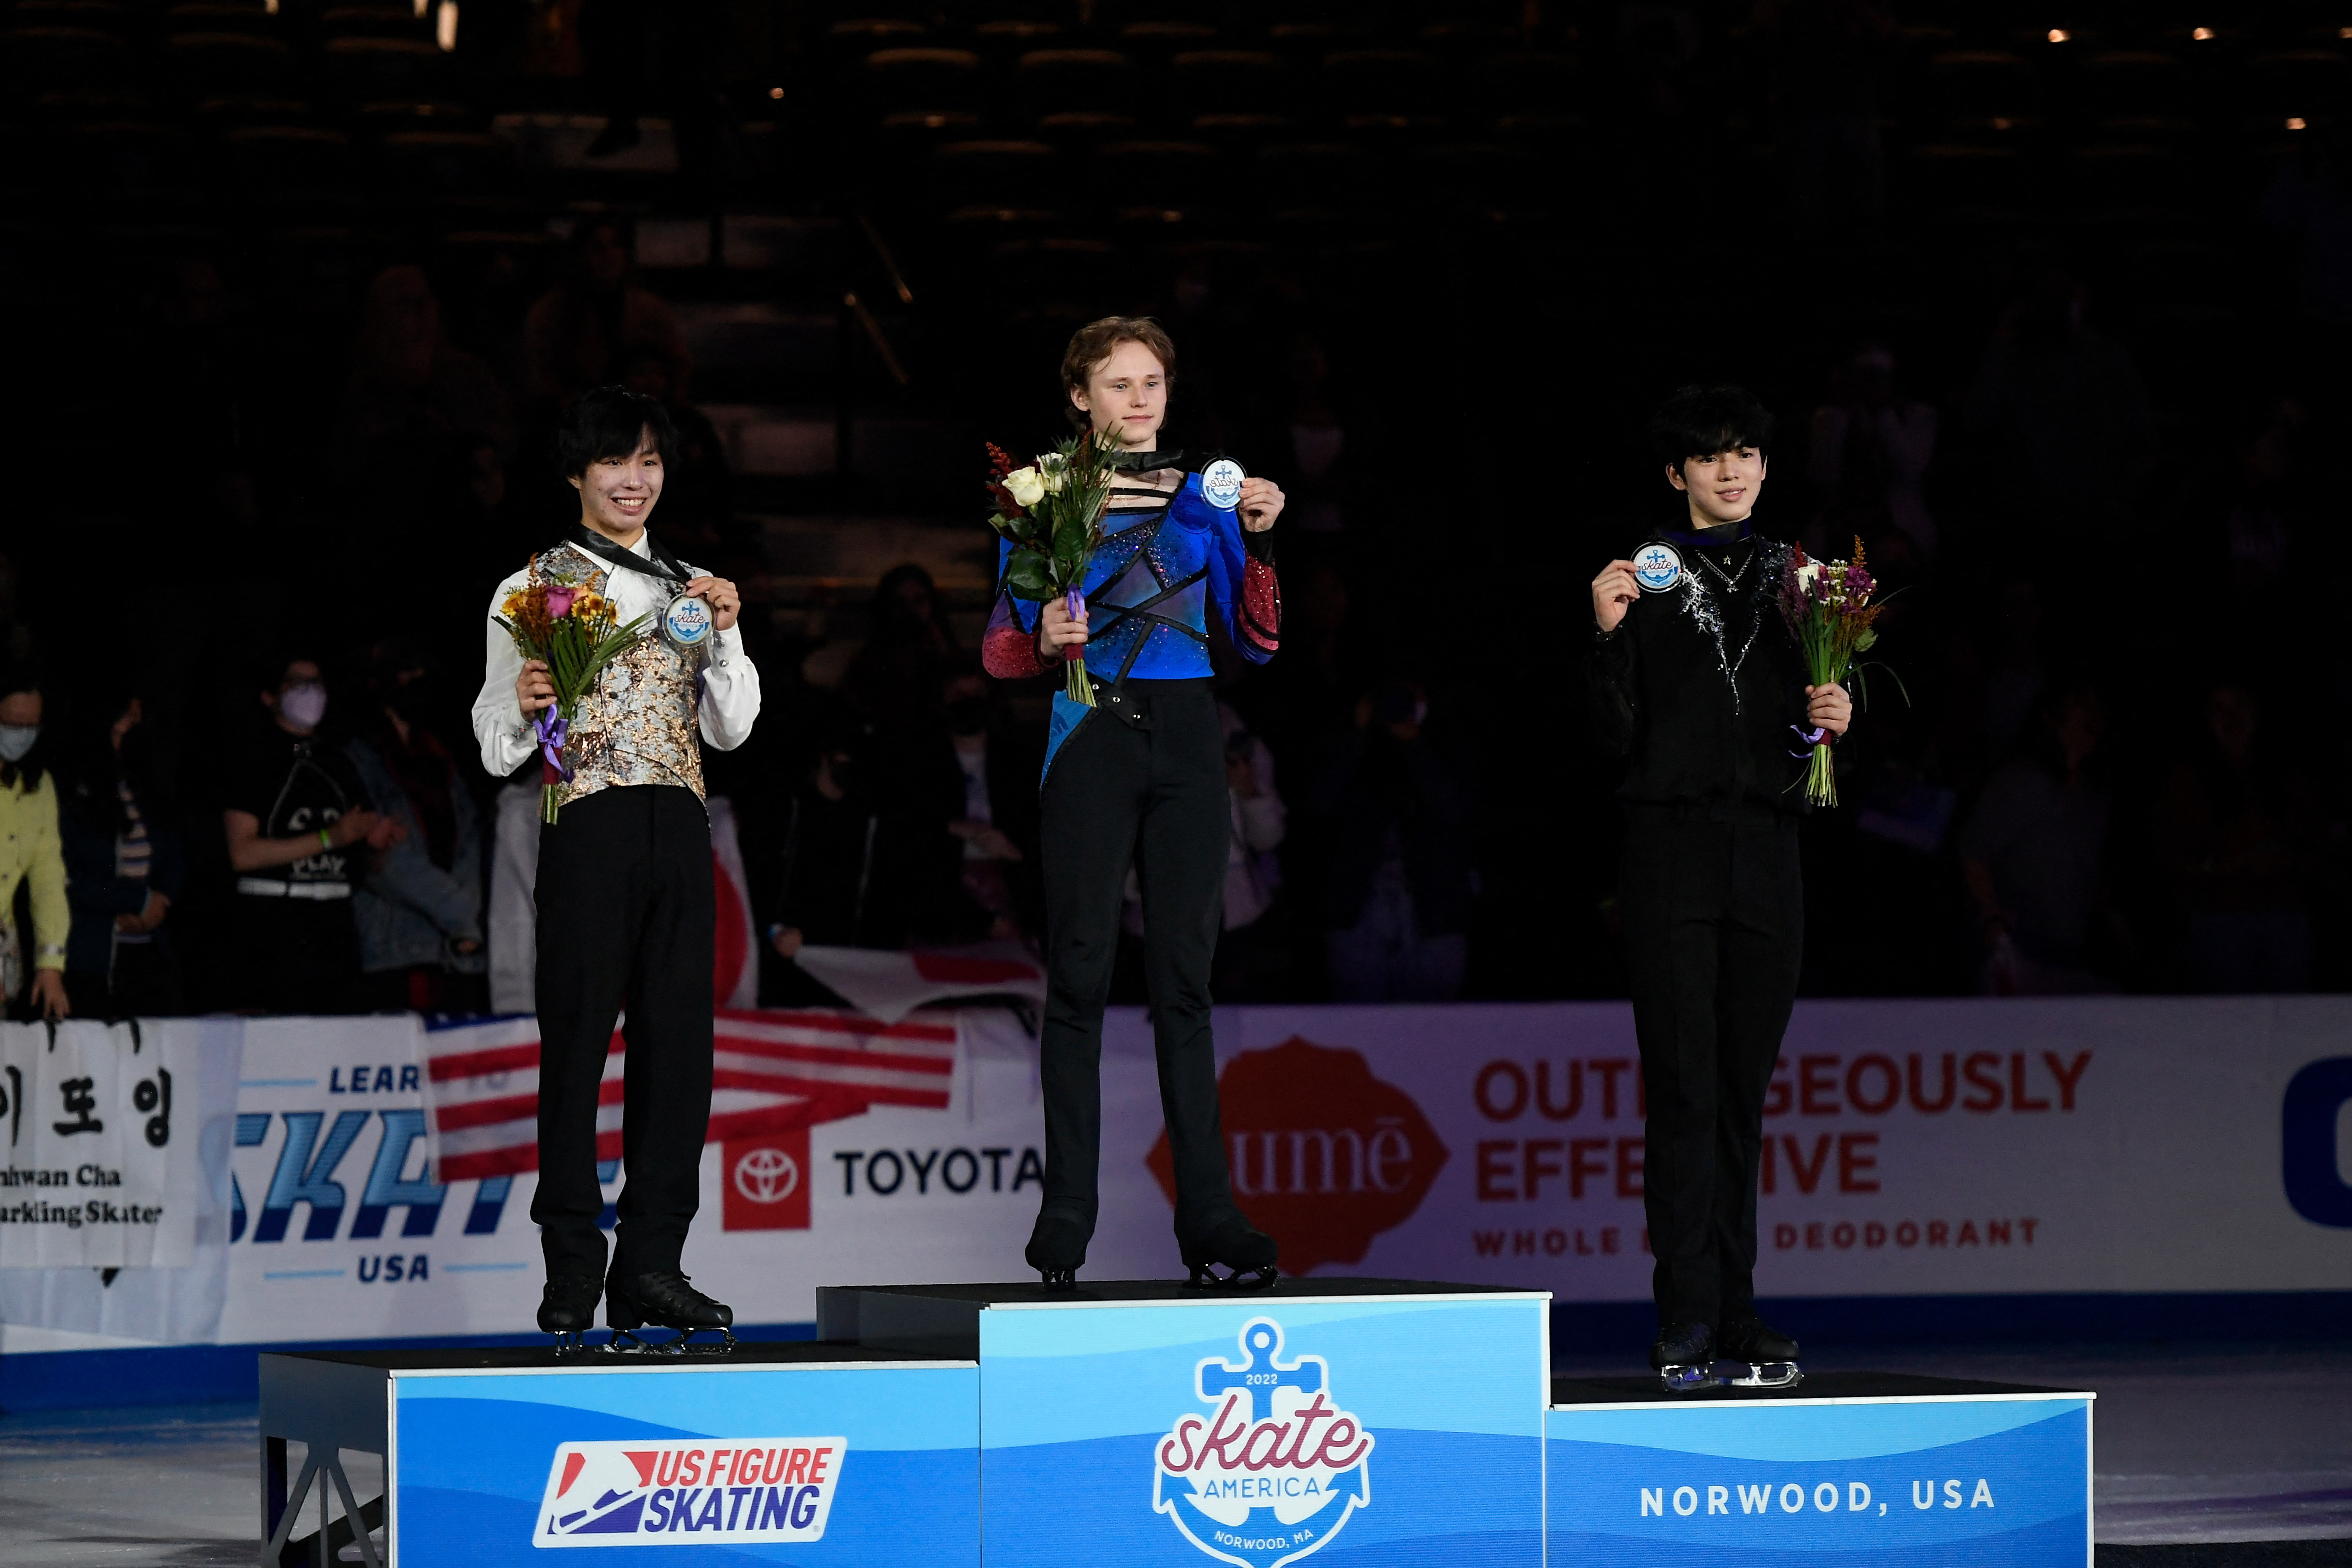 The three medalists for the men's competition - from left to right: Kao Miura (silver), Ilia Malinin (gold), Junhwan Cha (bronze) | Photo Credit: Eric Canha/USA TODAY Sports